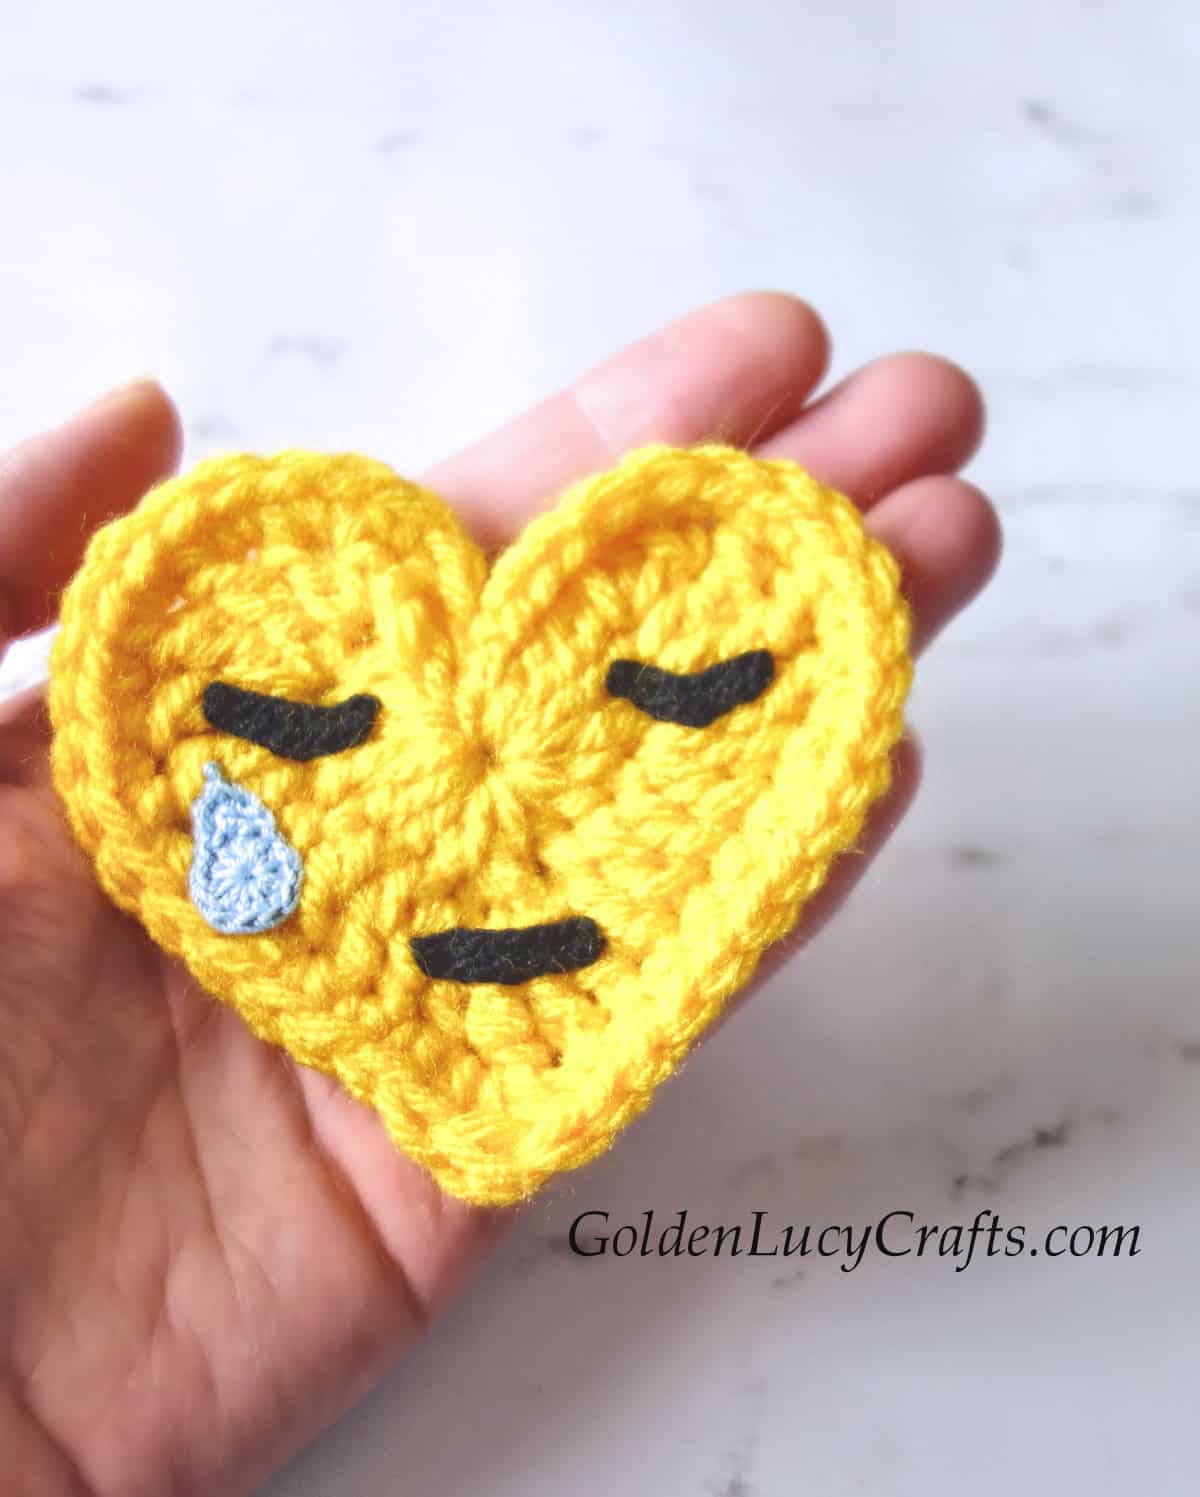 Crocheted crying face emoji applique in the palm of a hand.